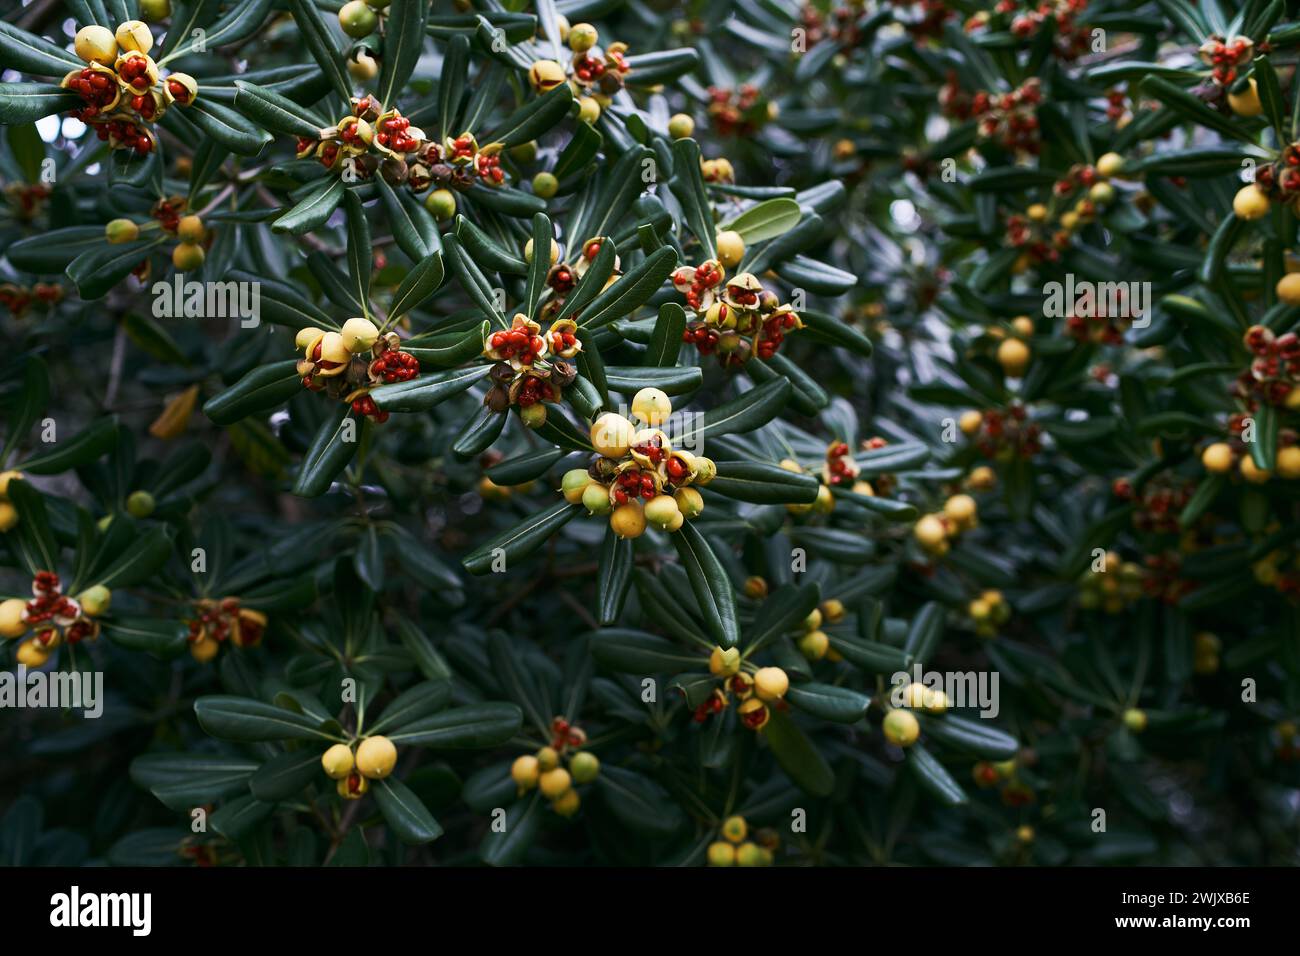 Yellow fruits with red seeds on a green Australian laurel bush in the garden Stock Photo